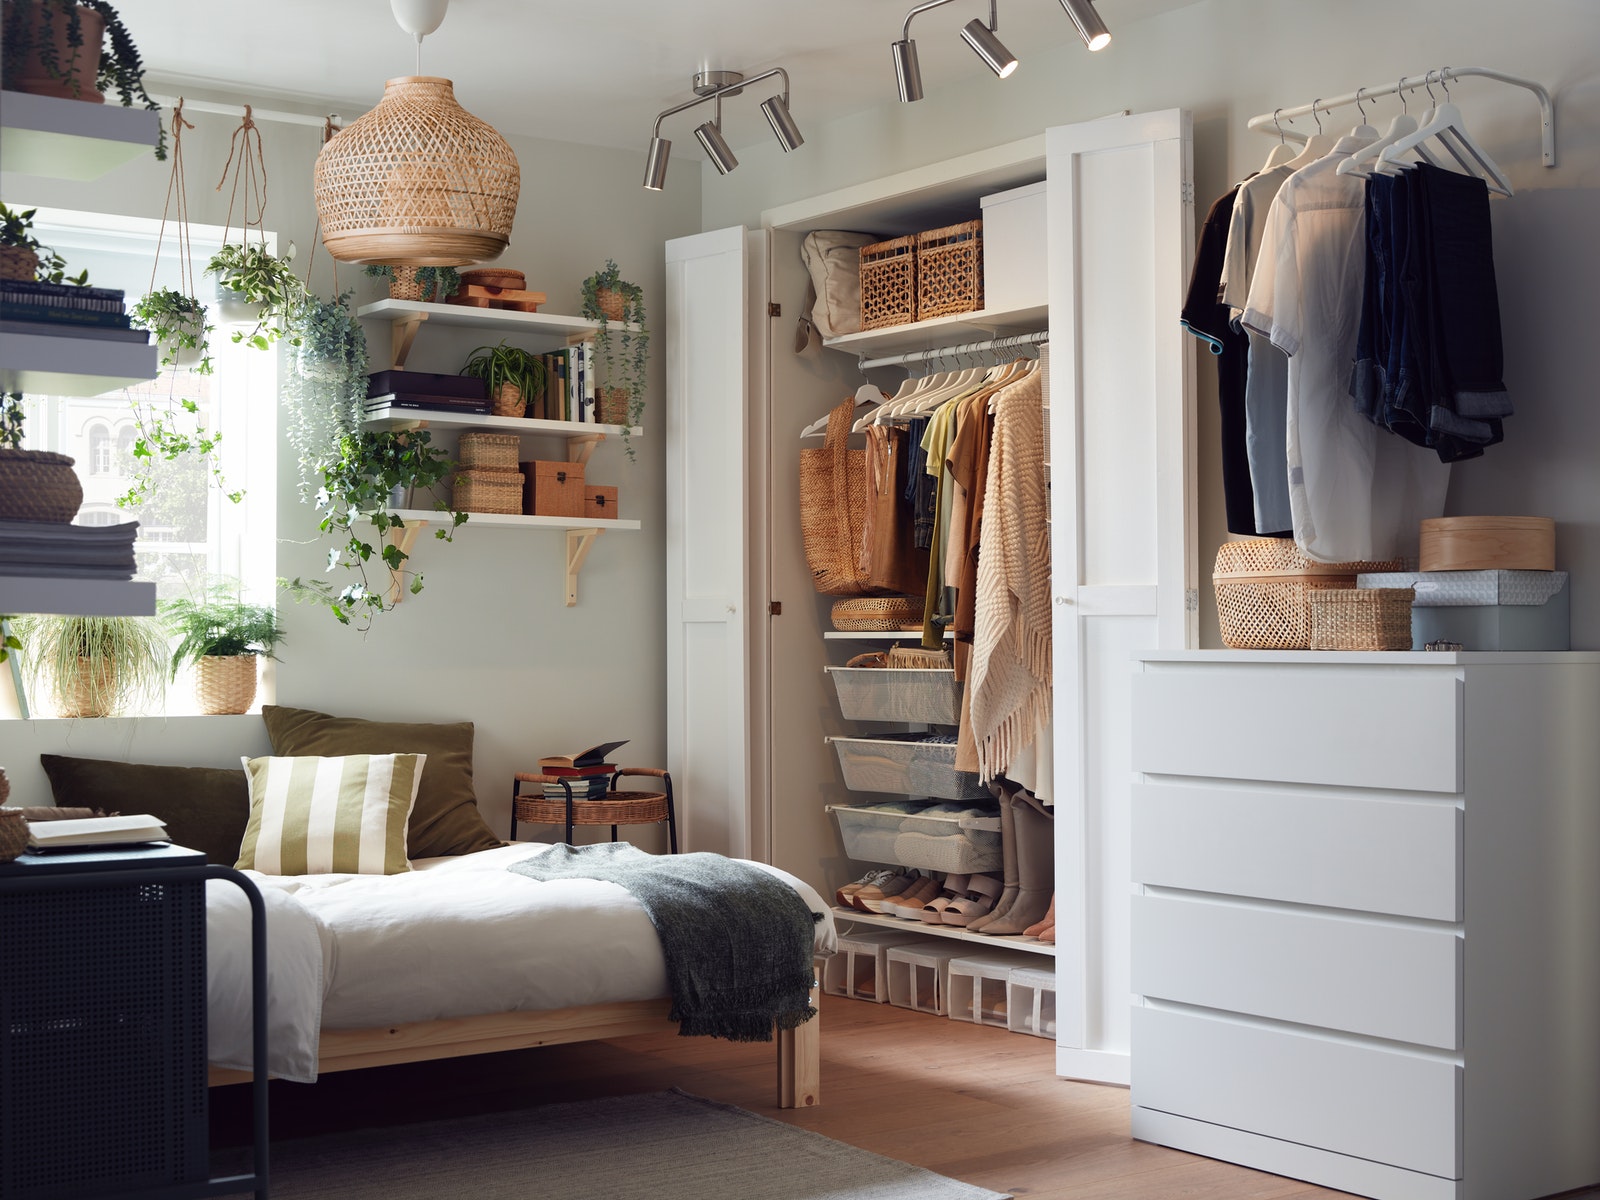 IKEA - A bedroom where everything is in its place